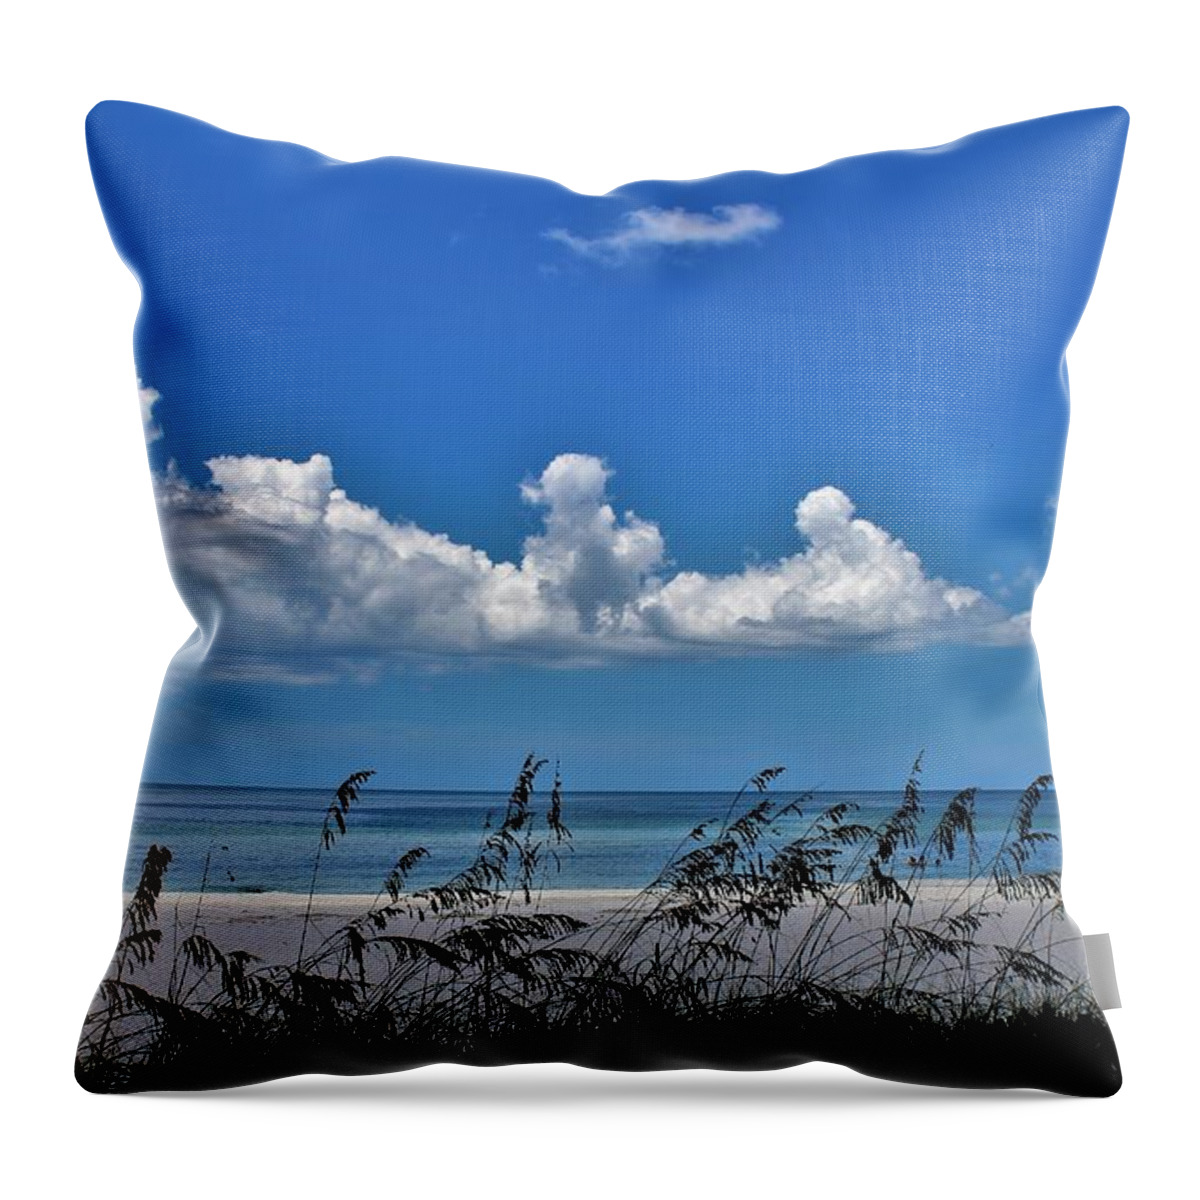  Throw Pillow featuring the photograph Naples Beach by Donn Ingemie